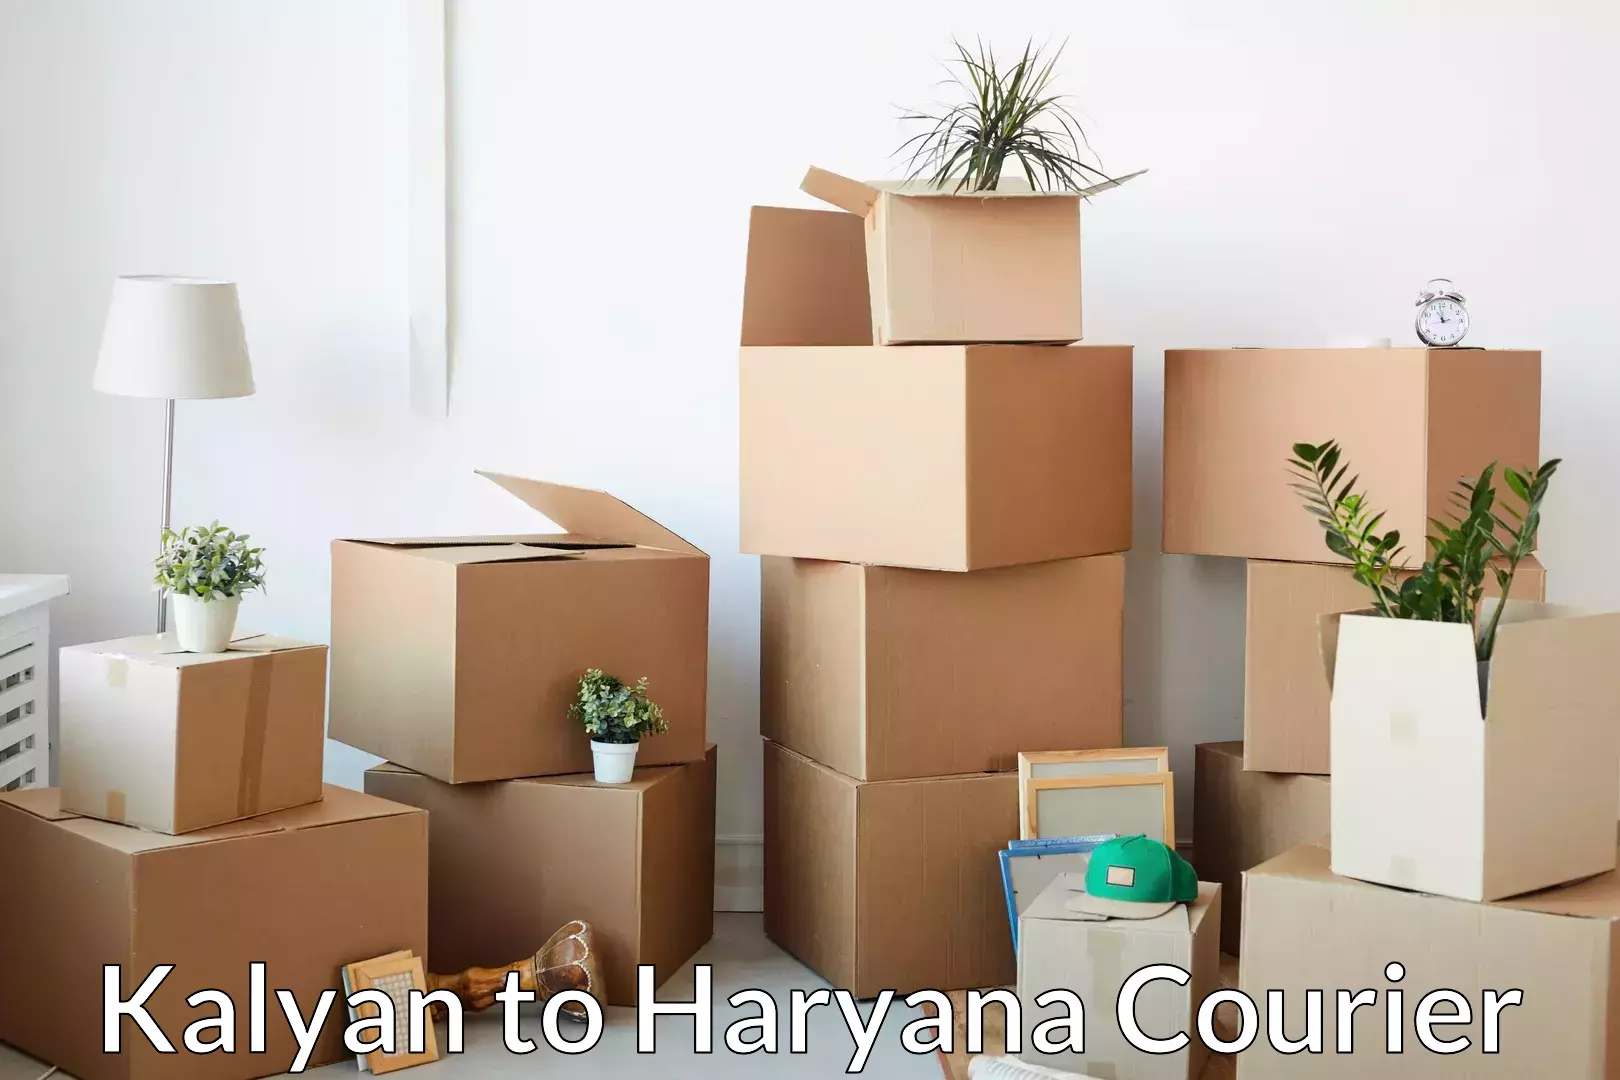 Home relocation experts Kalyan to Gurgaon